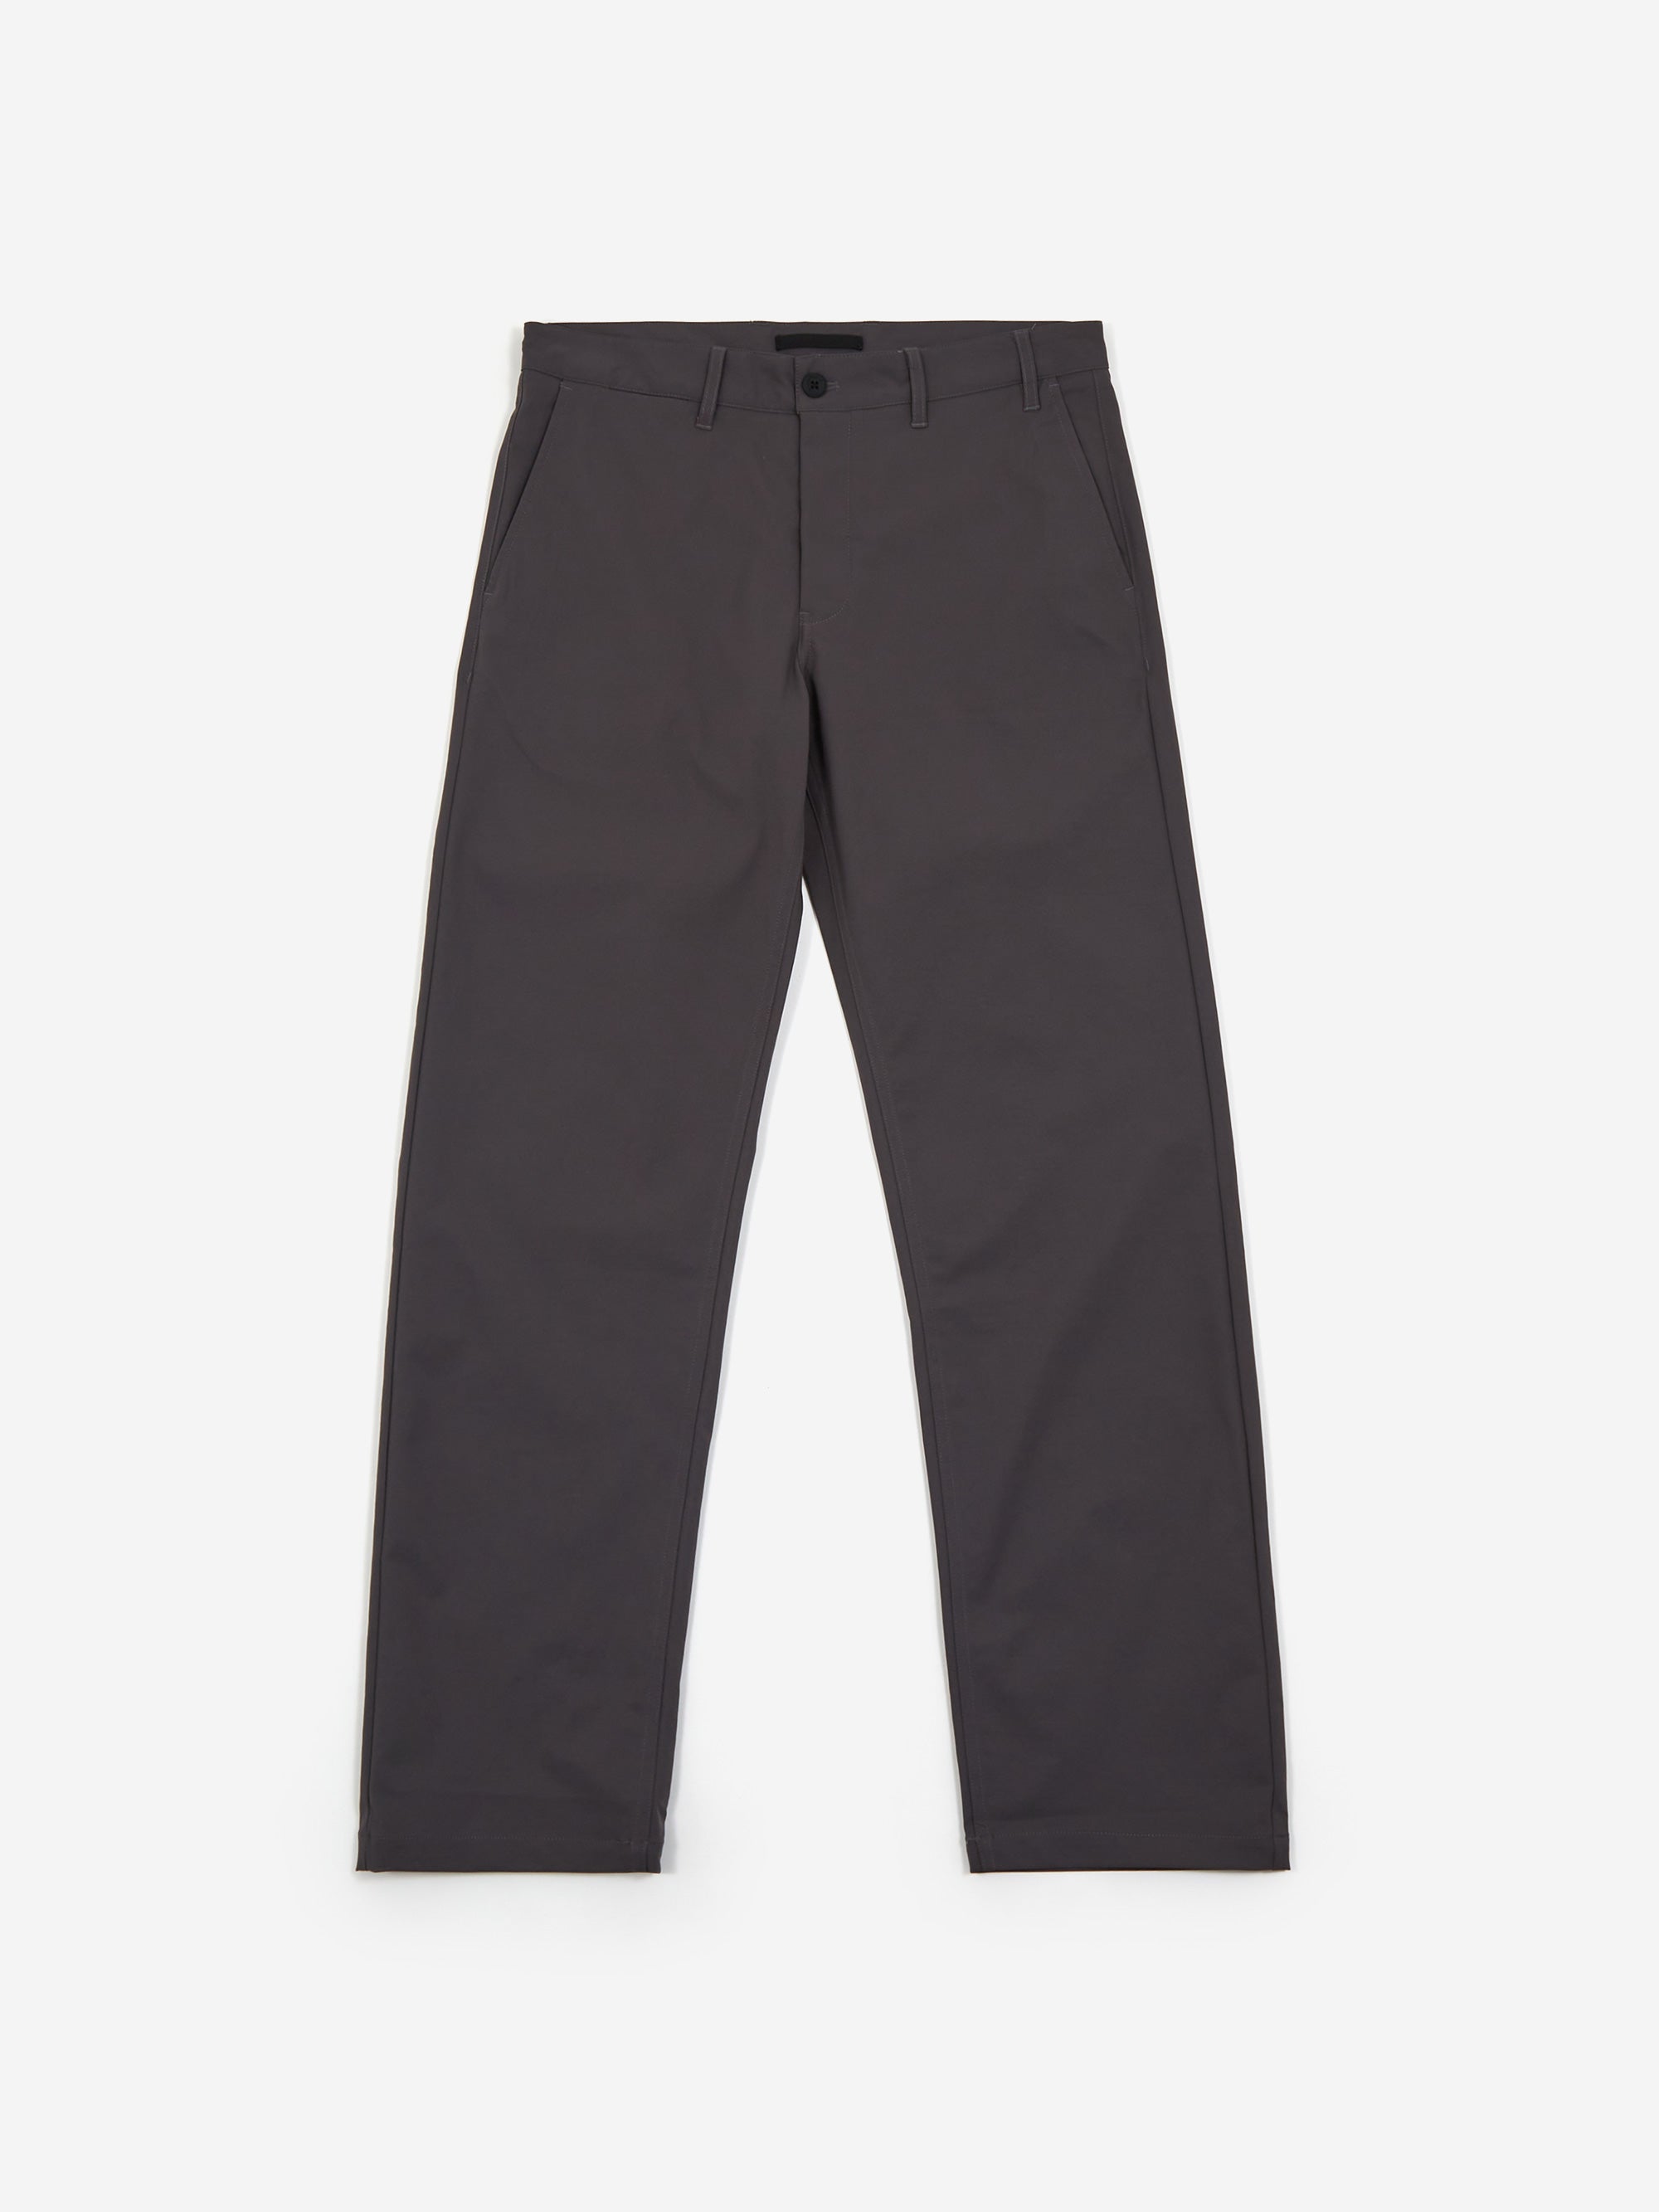 Norse Store  Shipping Worldwide - Trousers - Snow Peak - DWR light Pants